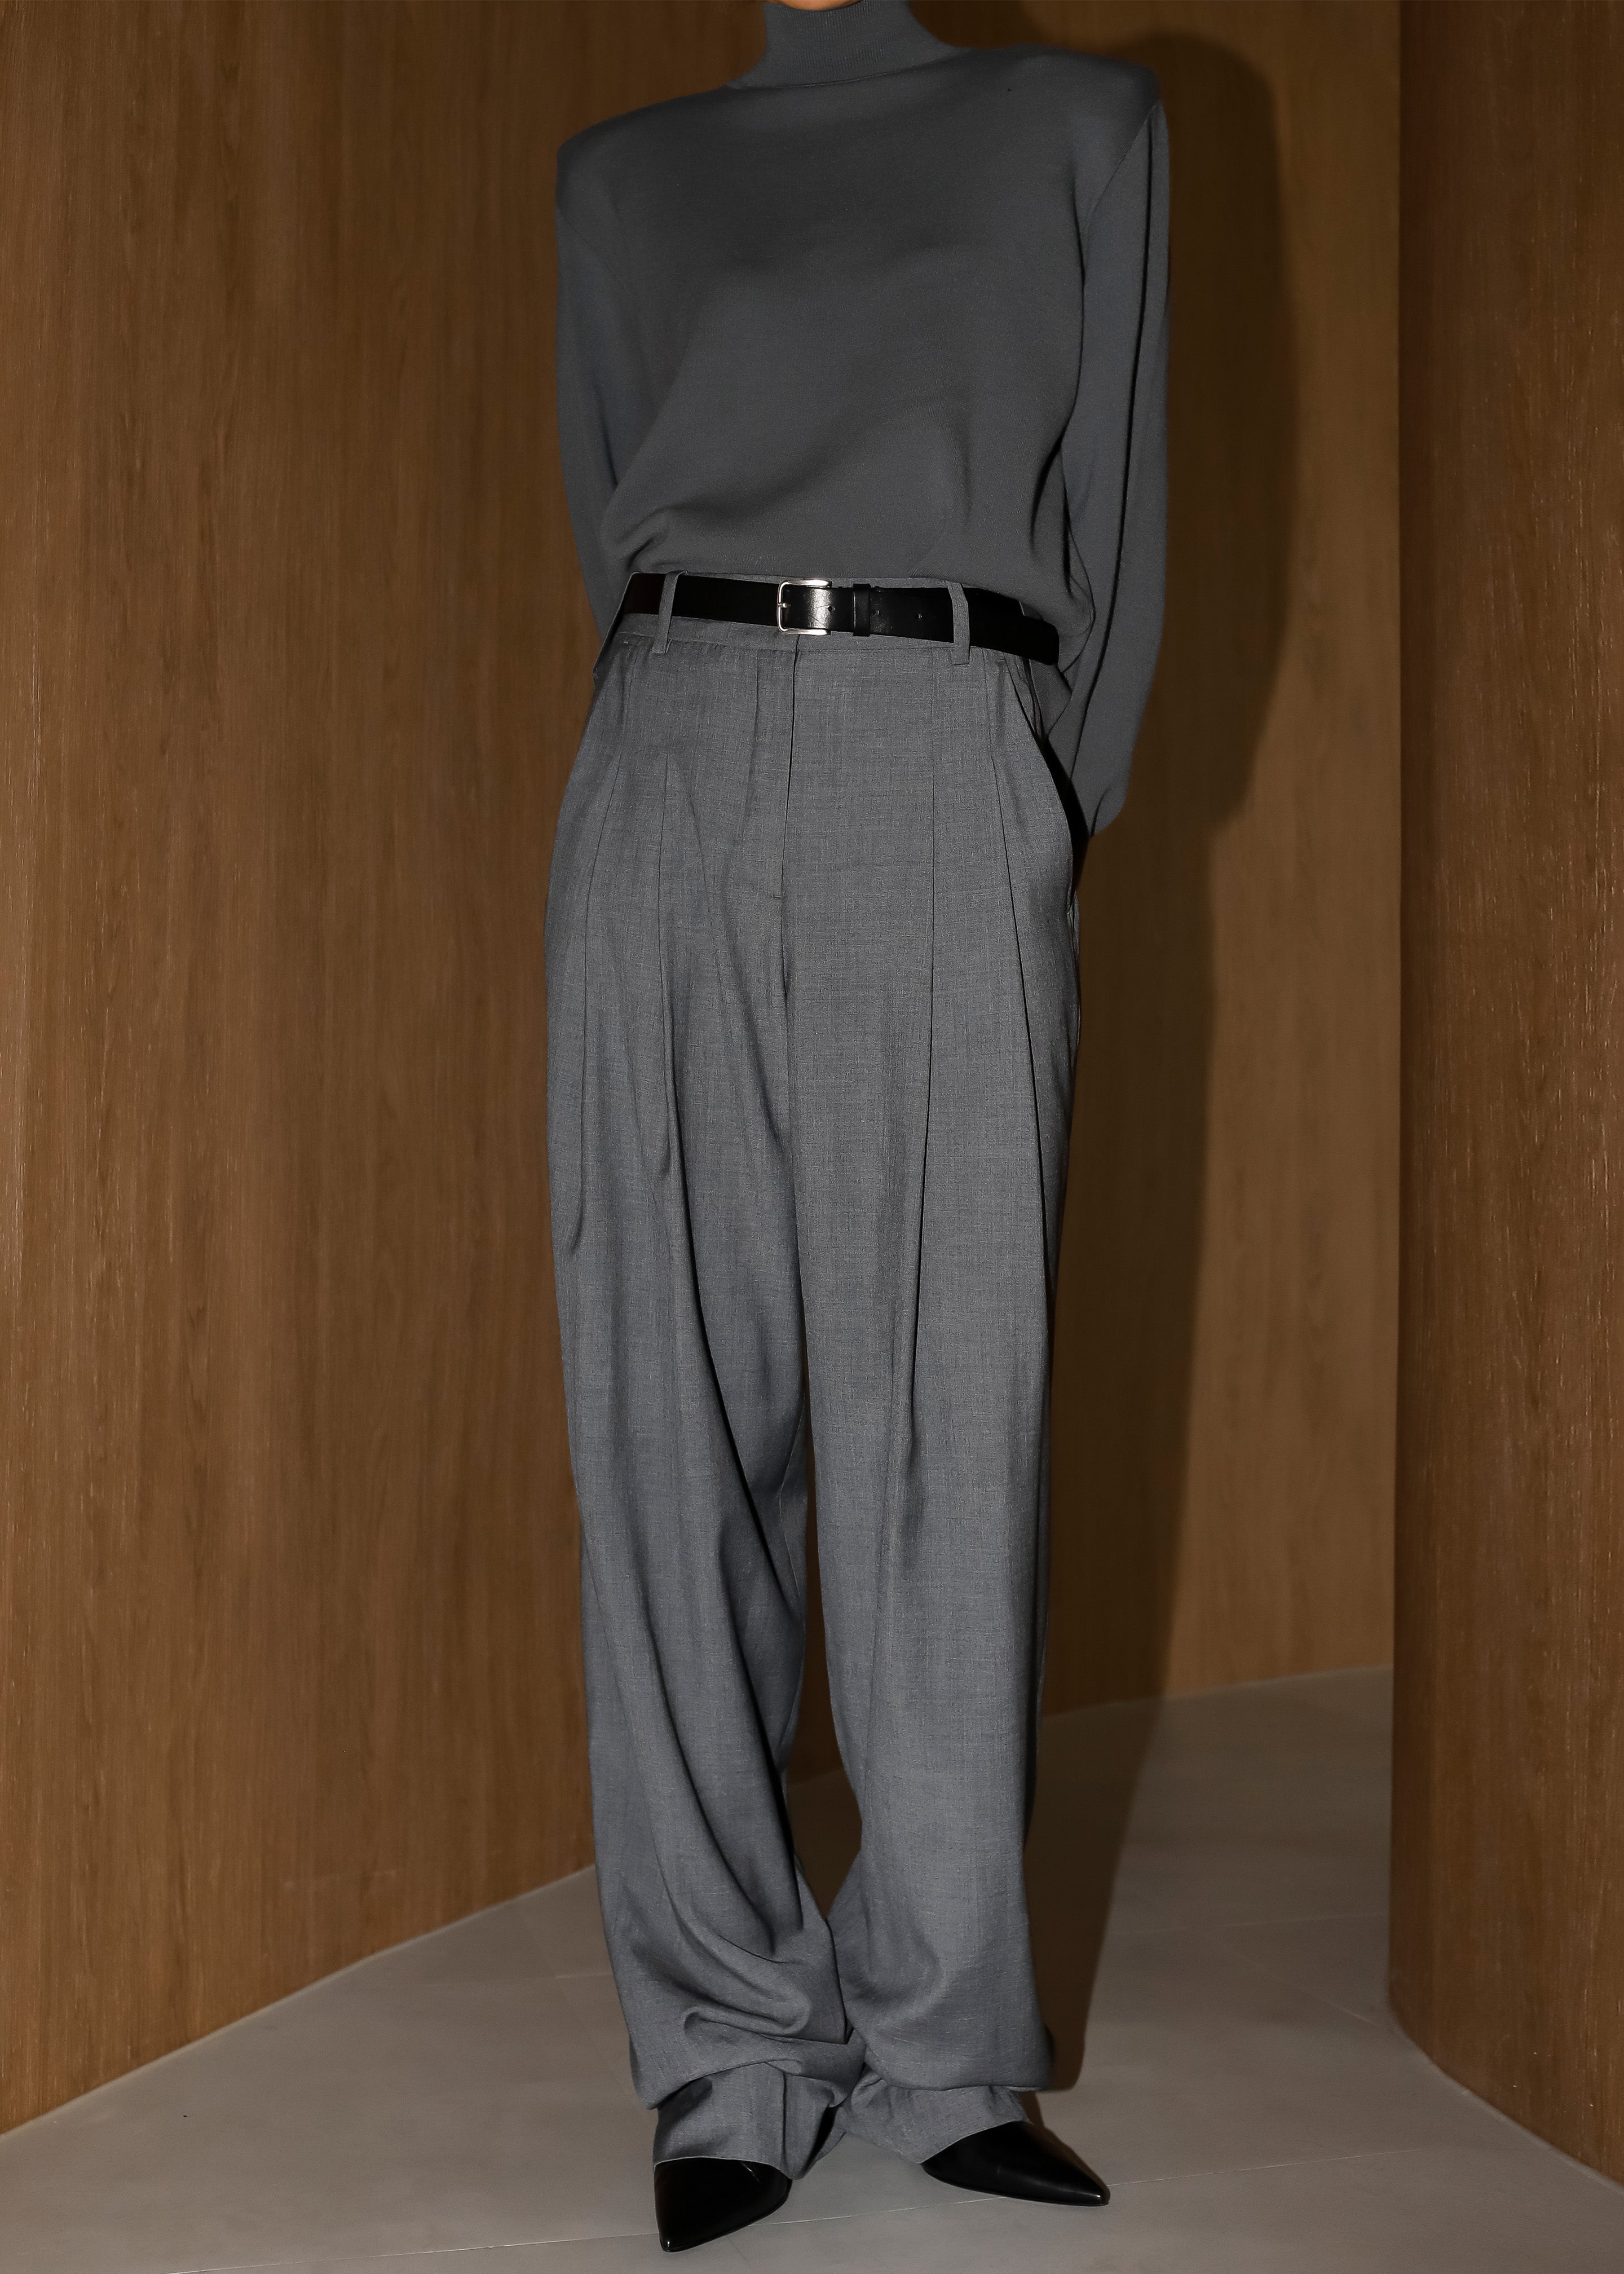 Strictly Business Grey High Waisted Trouser Pants